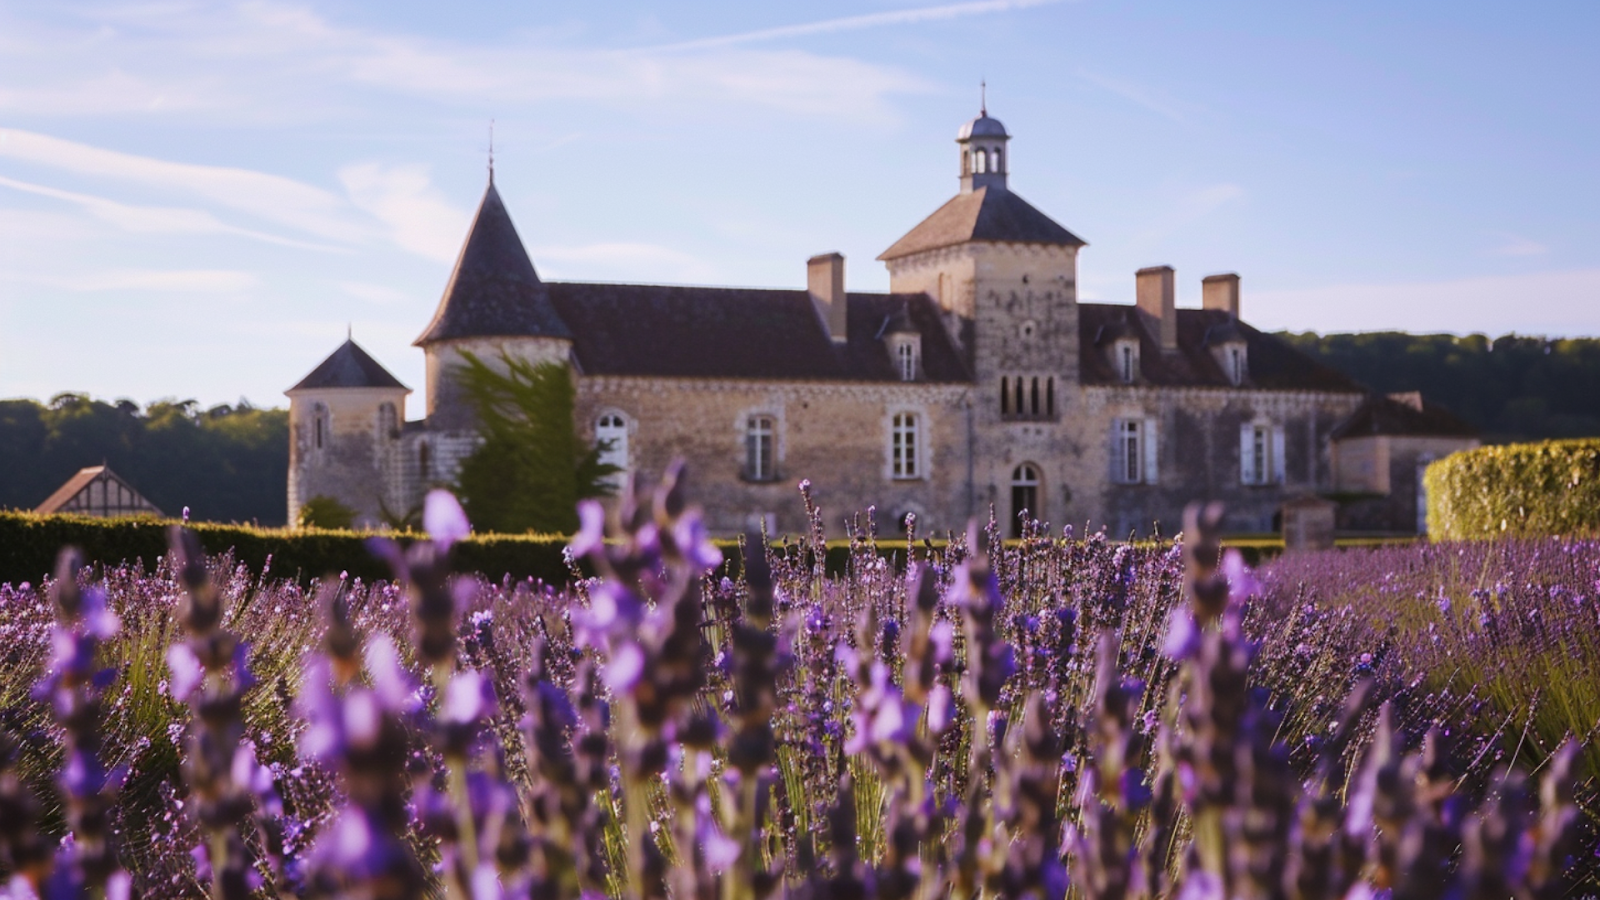 A chateau with lavenders in the foreground in Loire Valley, France